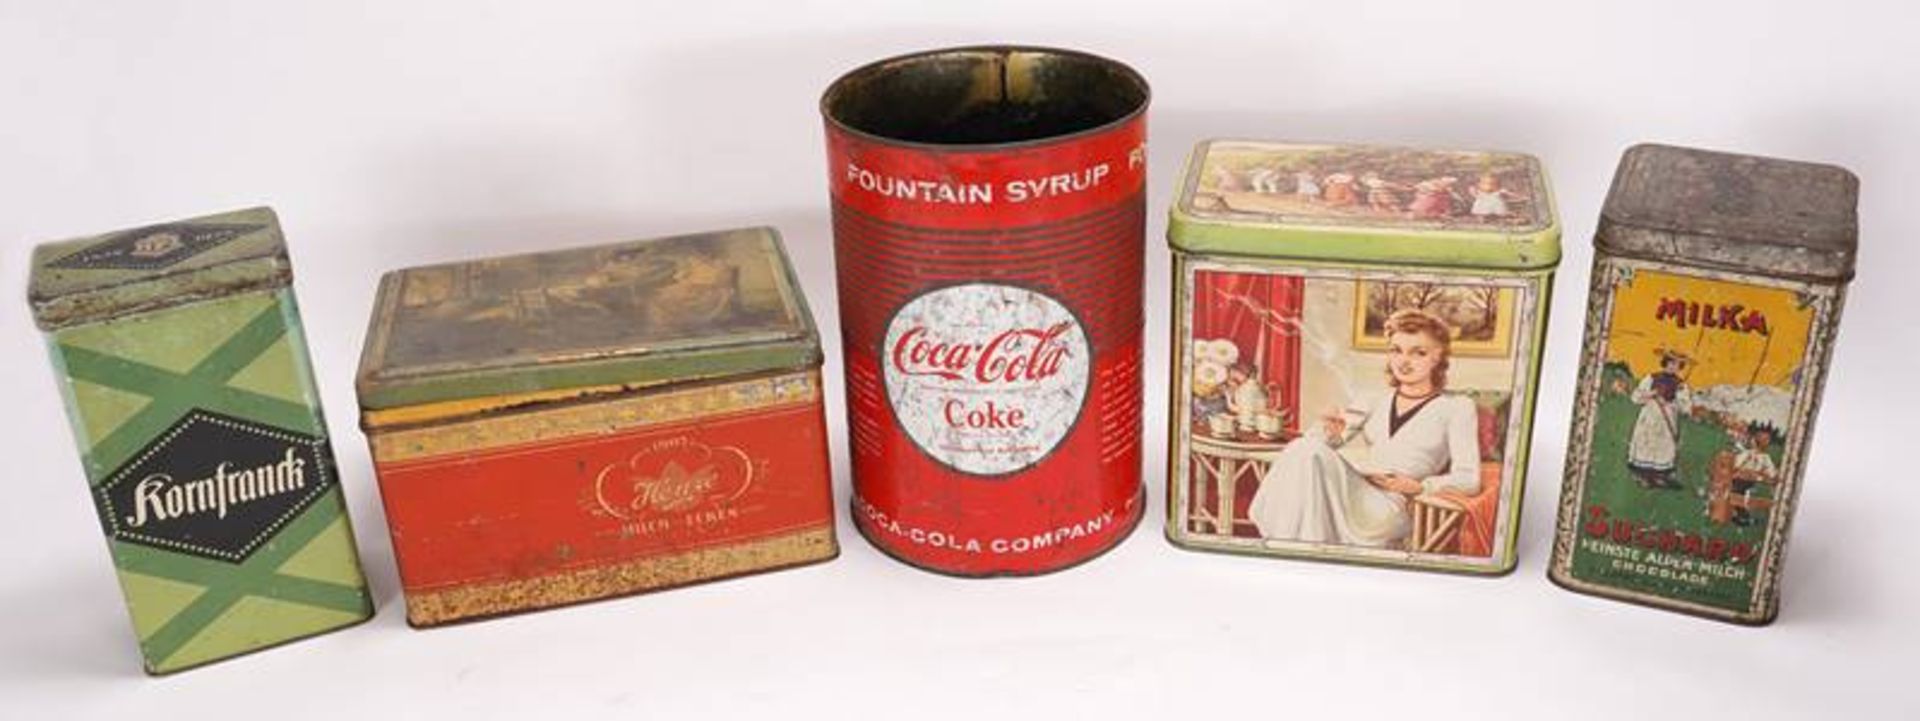 Convolute tin cans - Image 2 of 3